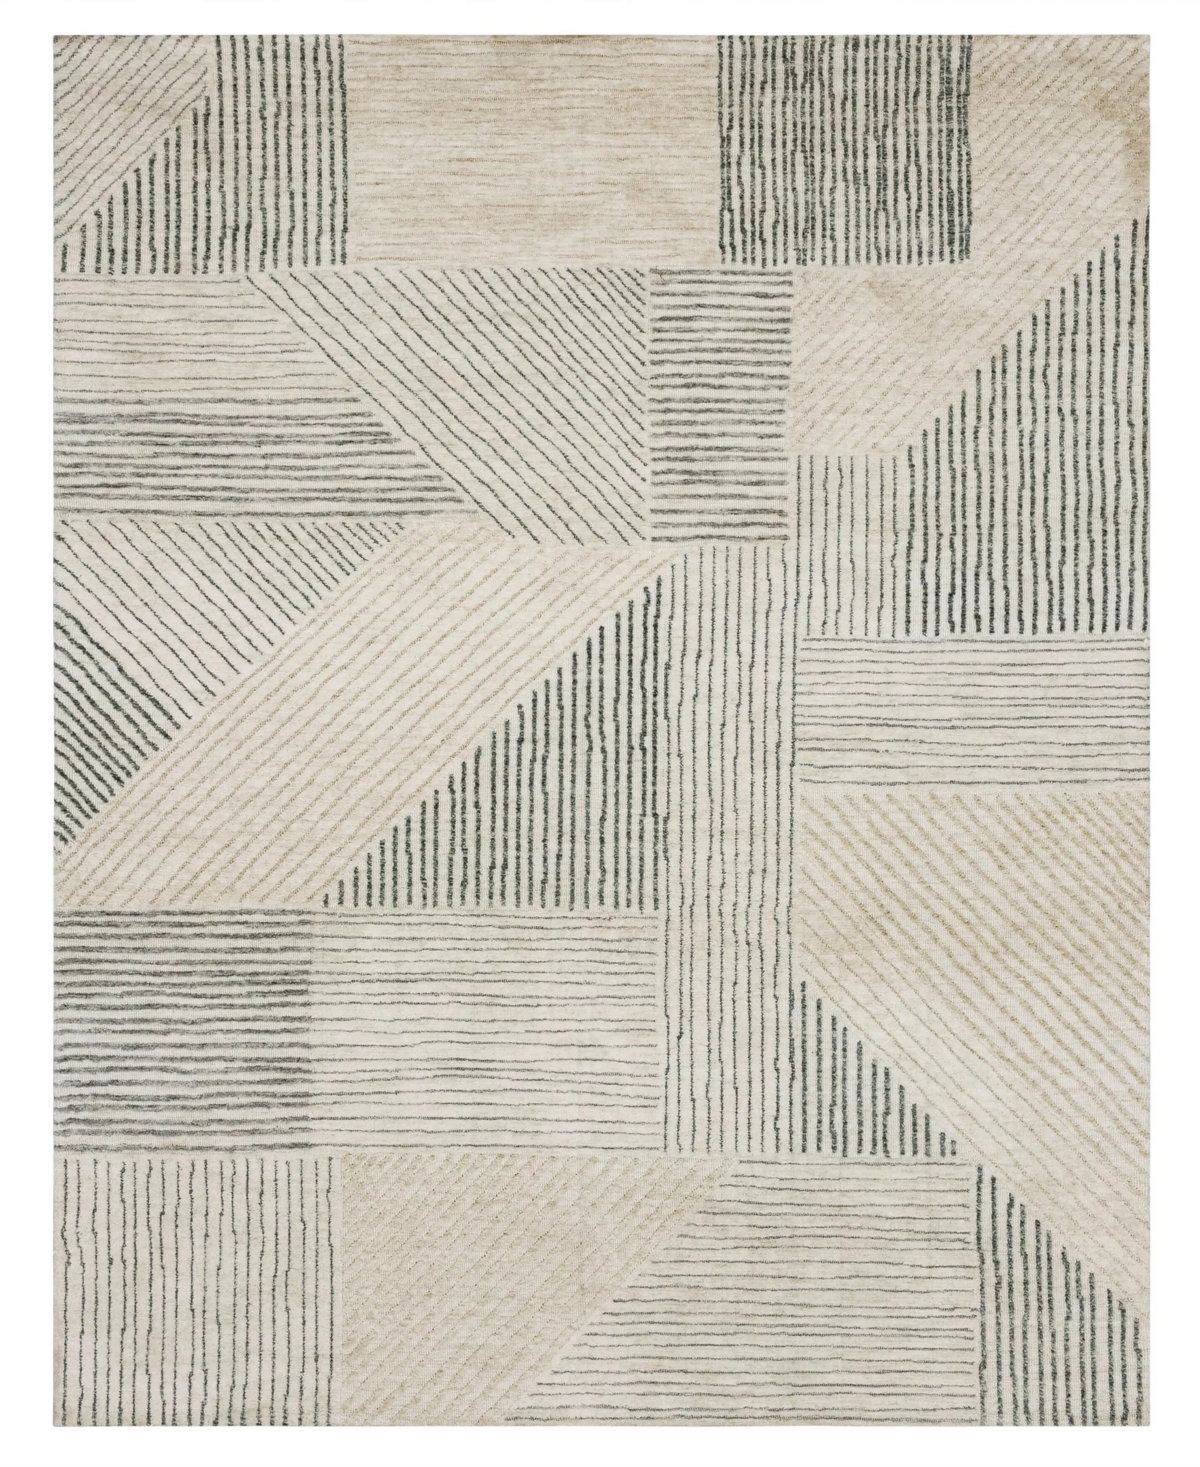 Drew & Jonathan Home Bowen Central Valley Area Rug, 8' X 10' In Tan